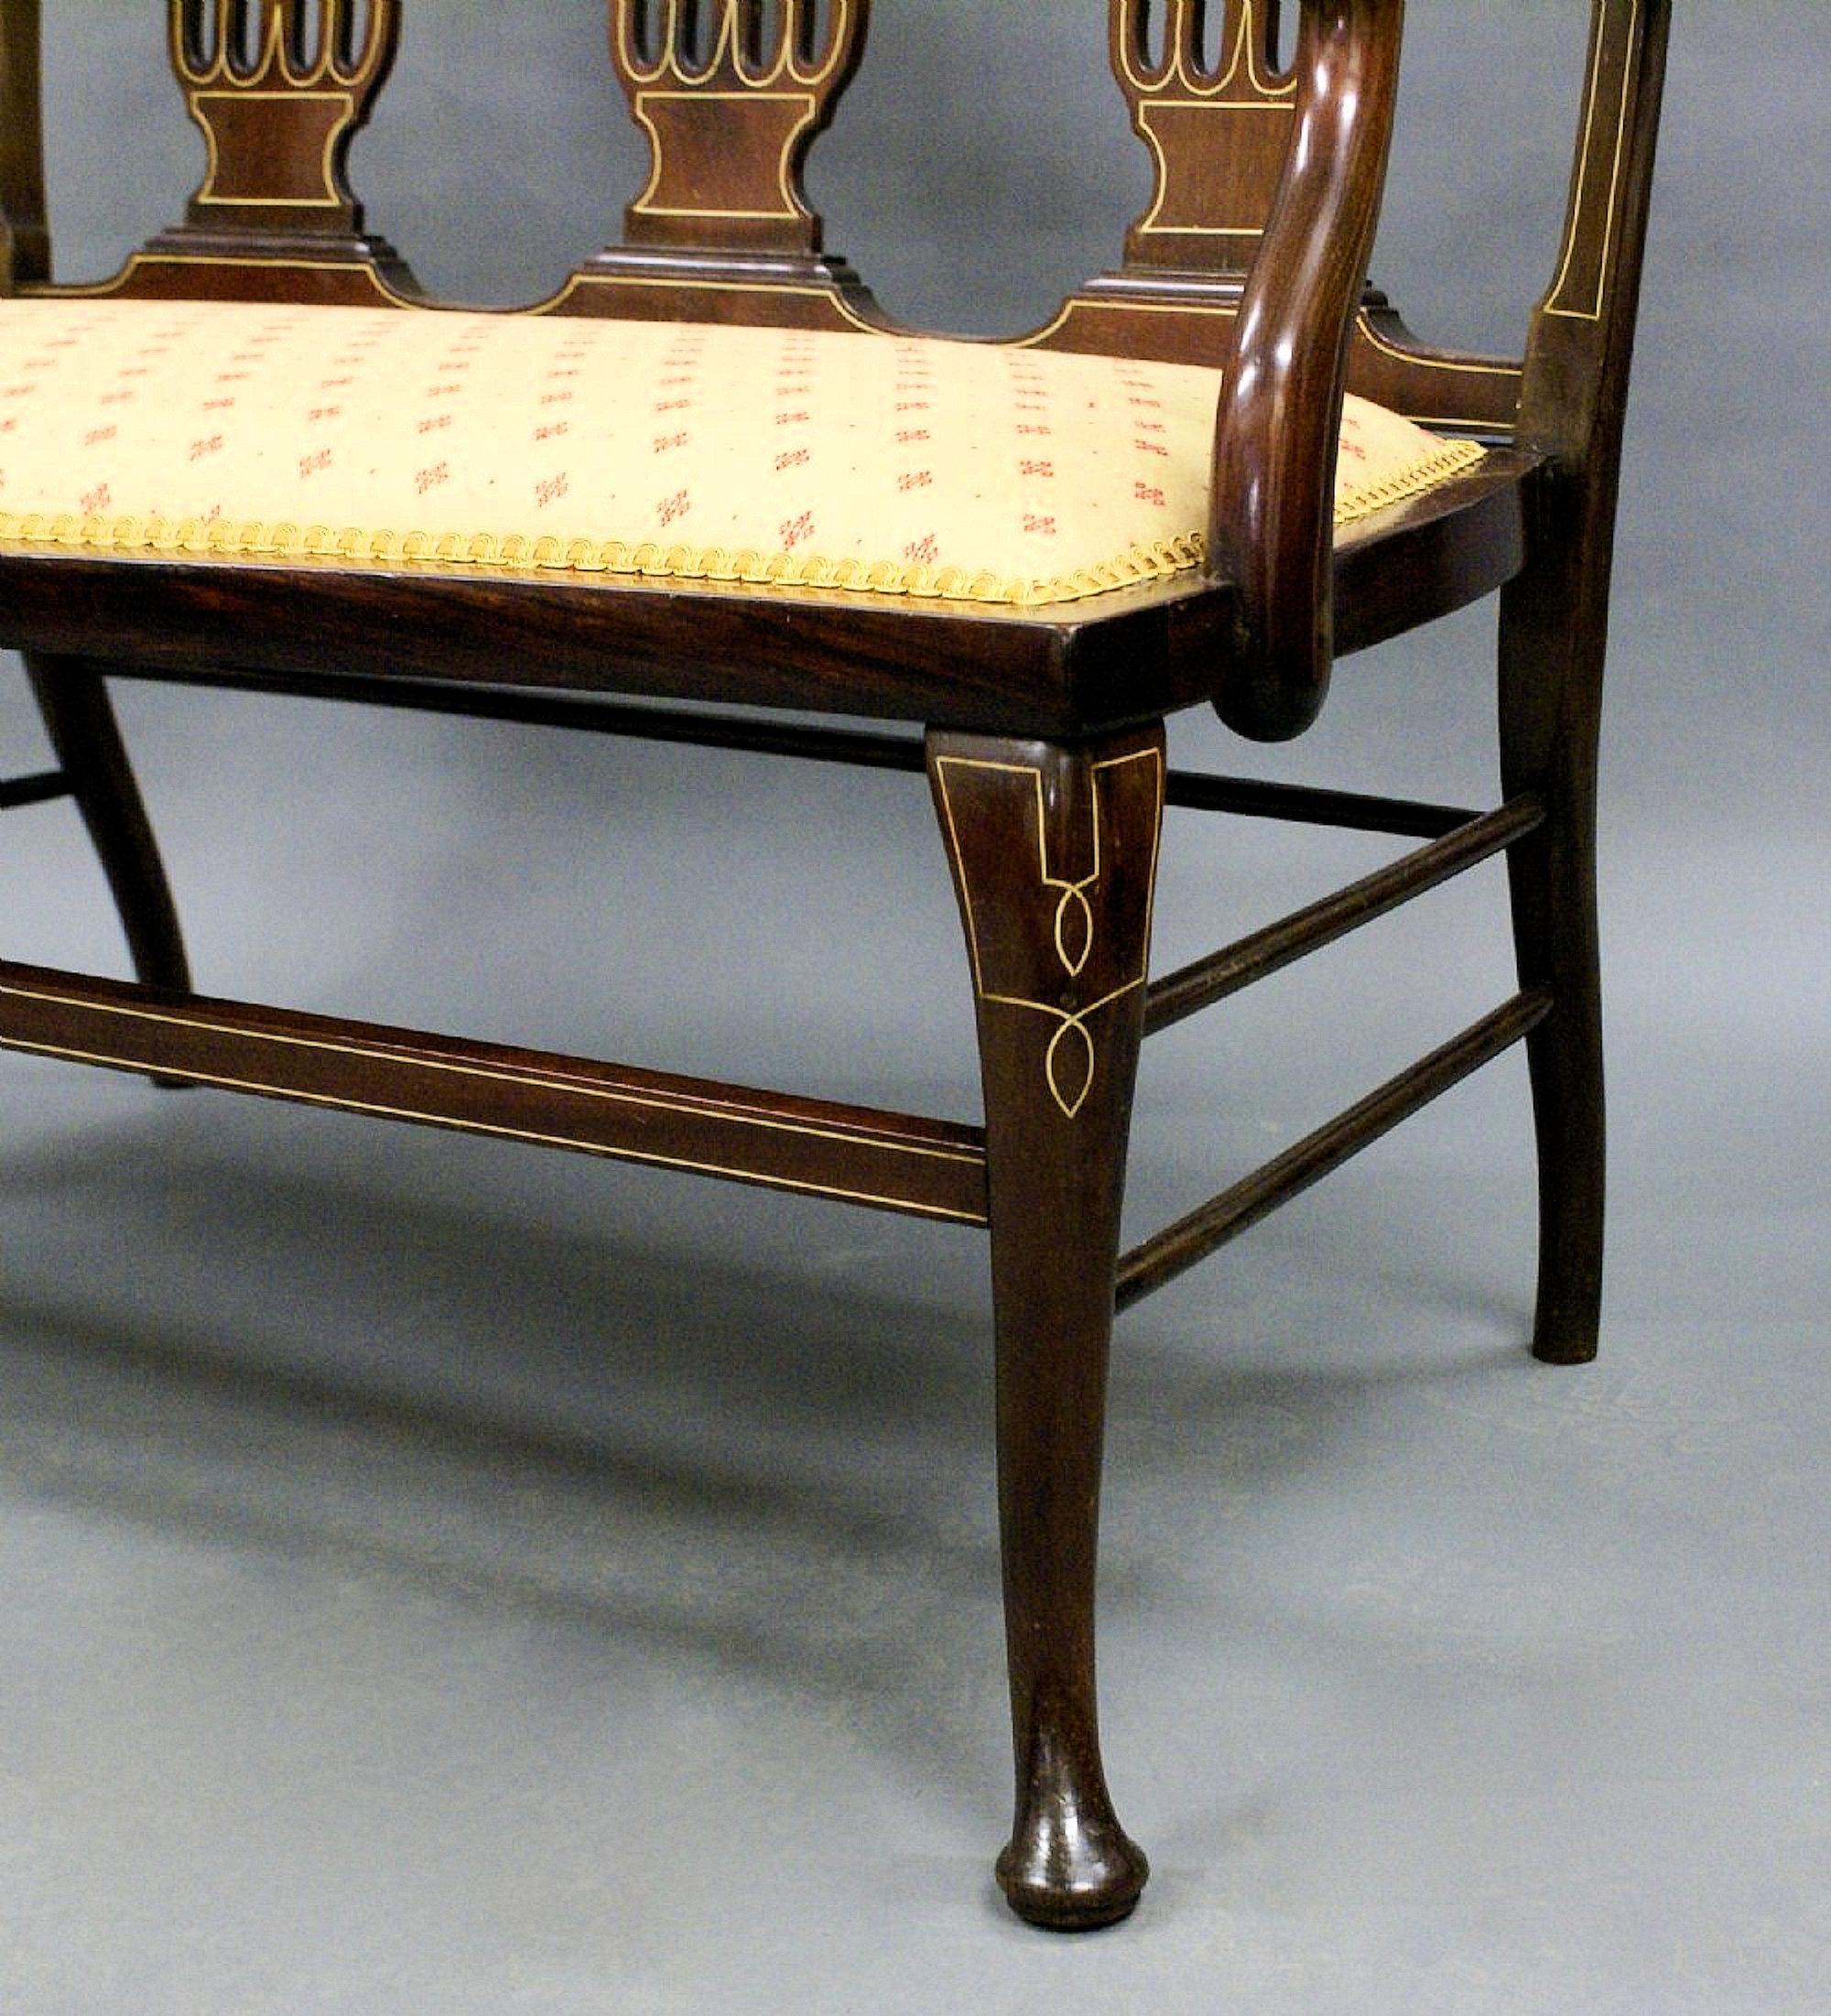 Hand-Carved 19th Century English Inlaid Mahogany Settee For Sale